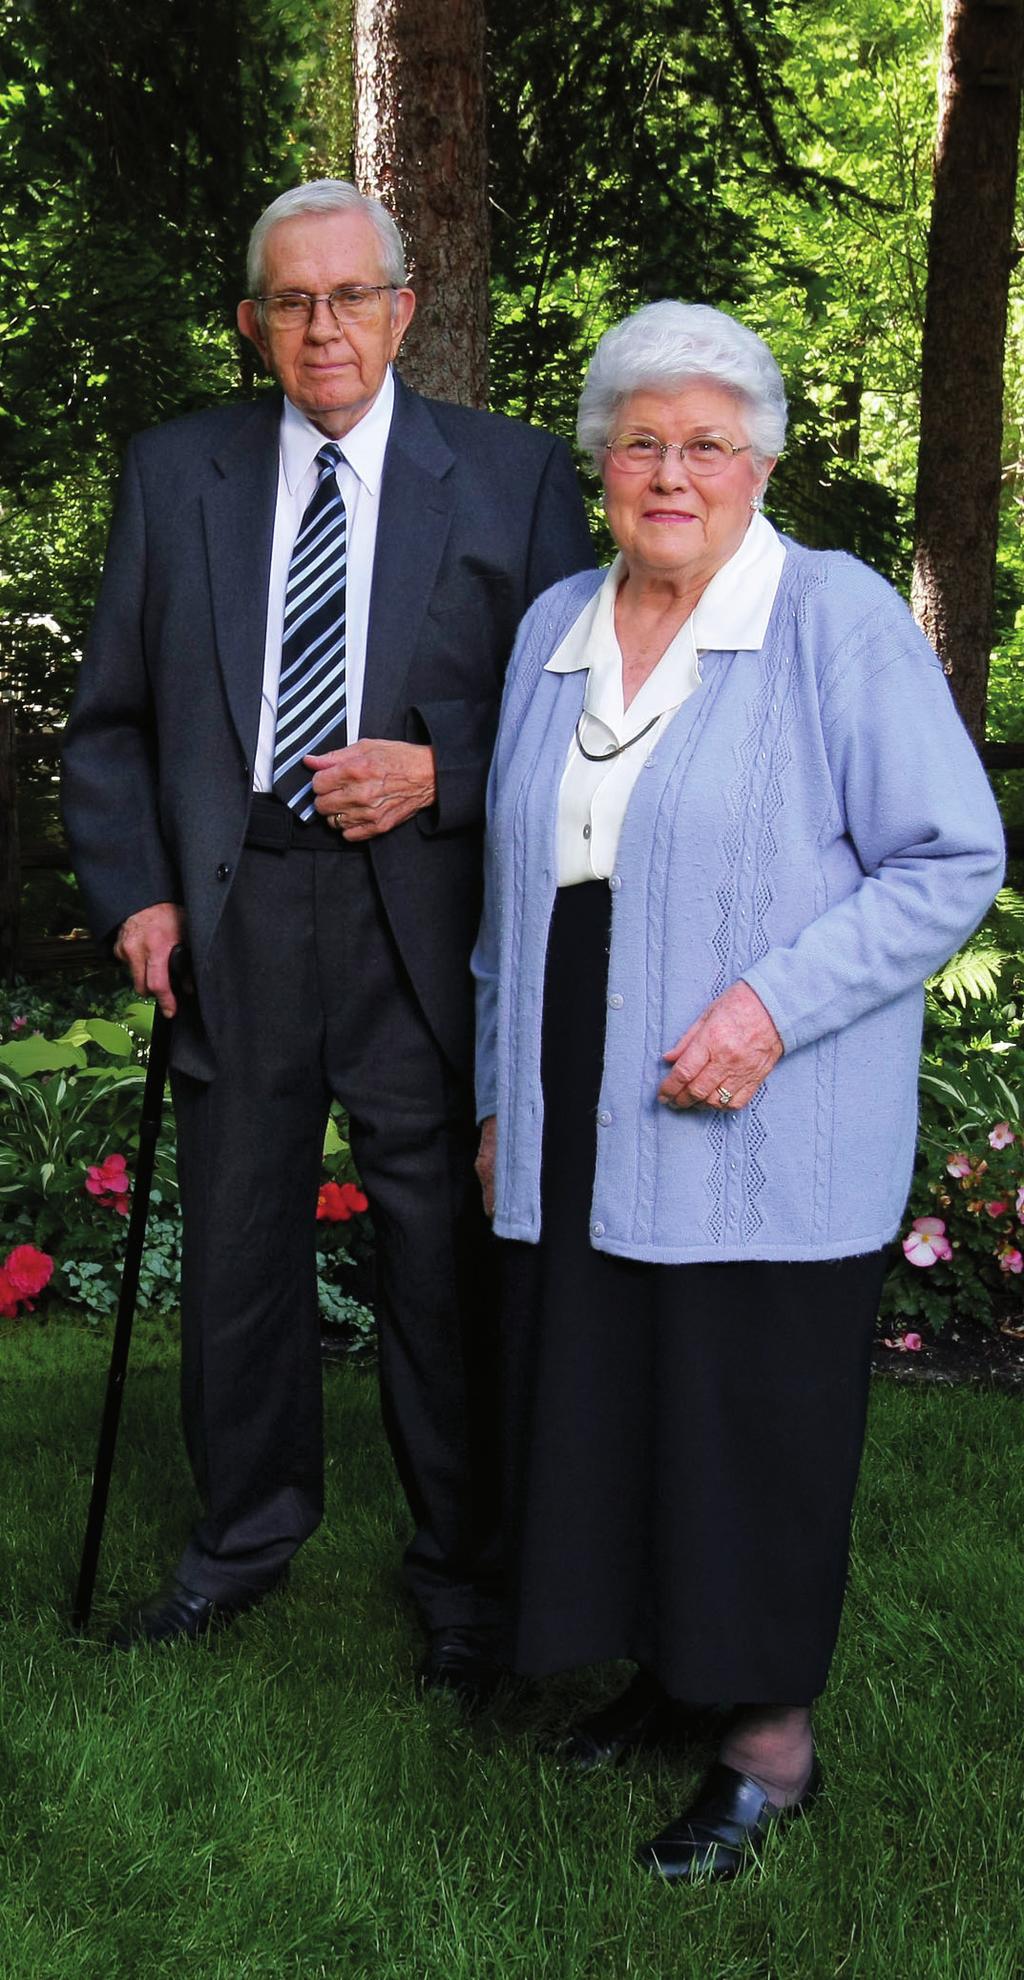 Sister Donna Smith Packer and I have been side by side in marriage for nearly 70 years. When it comes to my wife, the mother of our children, I am without words.